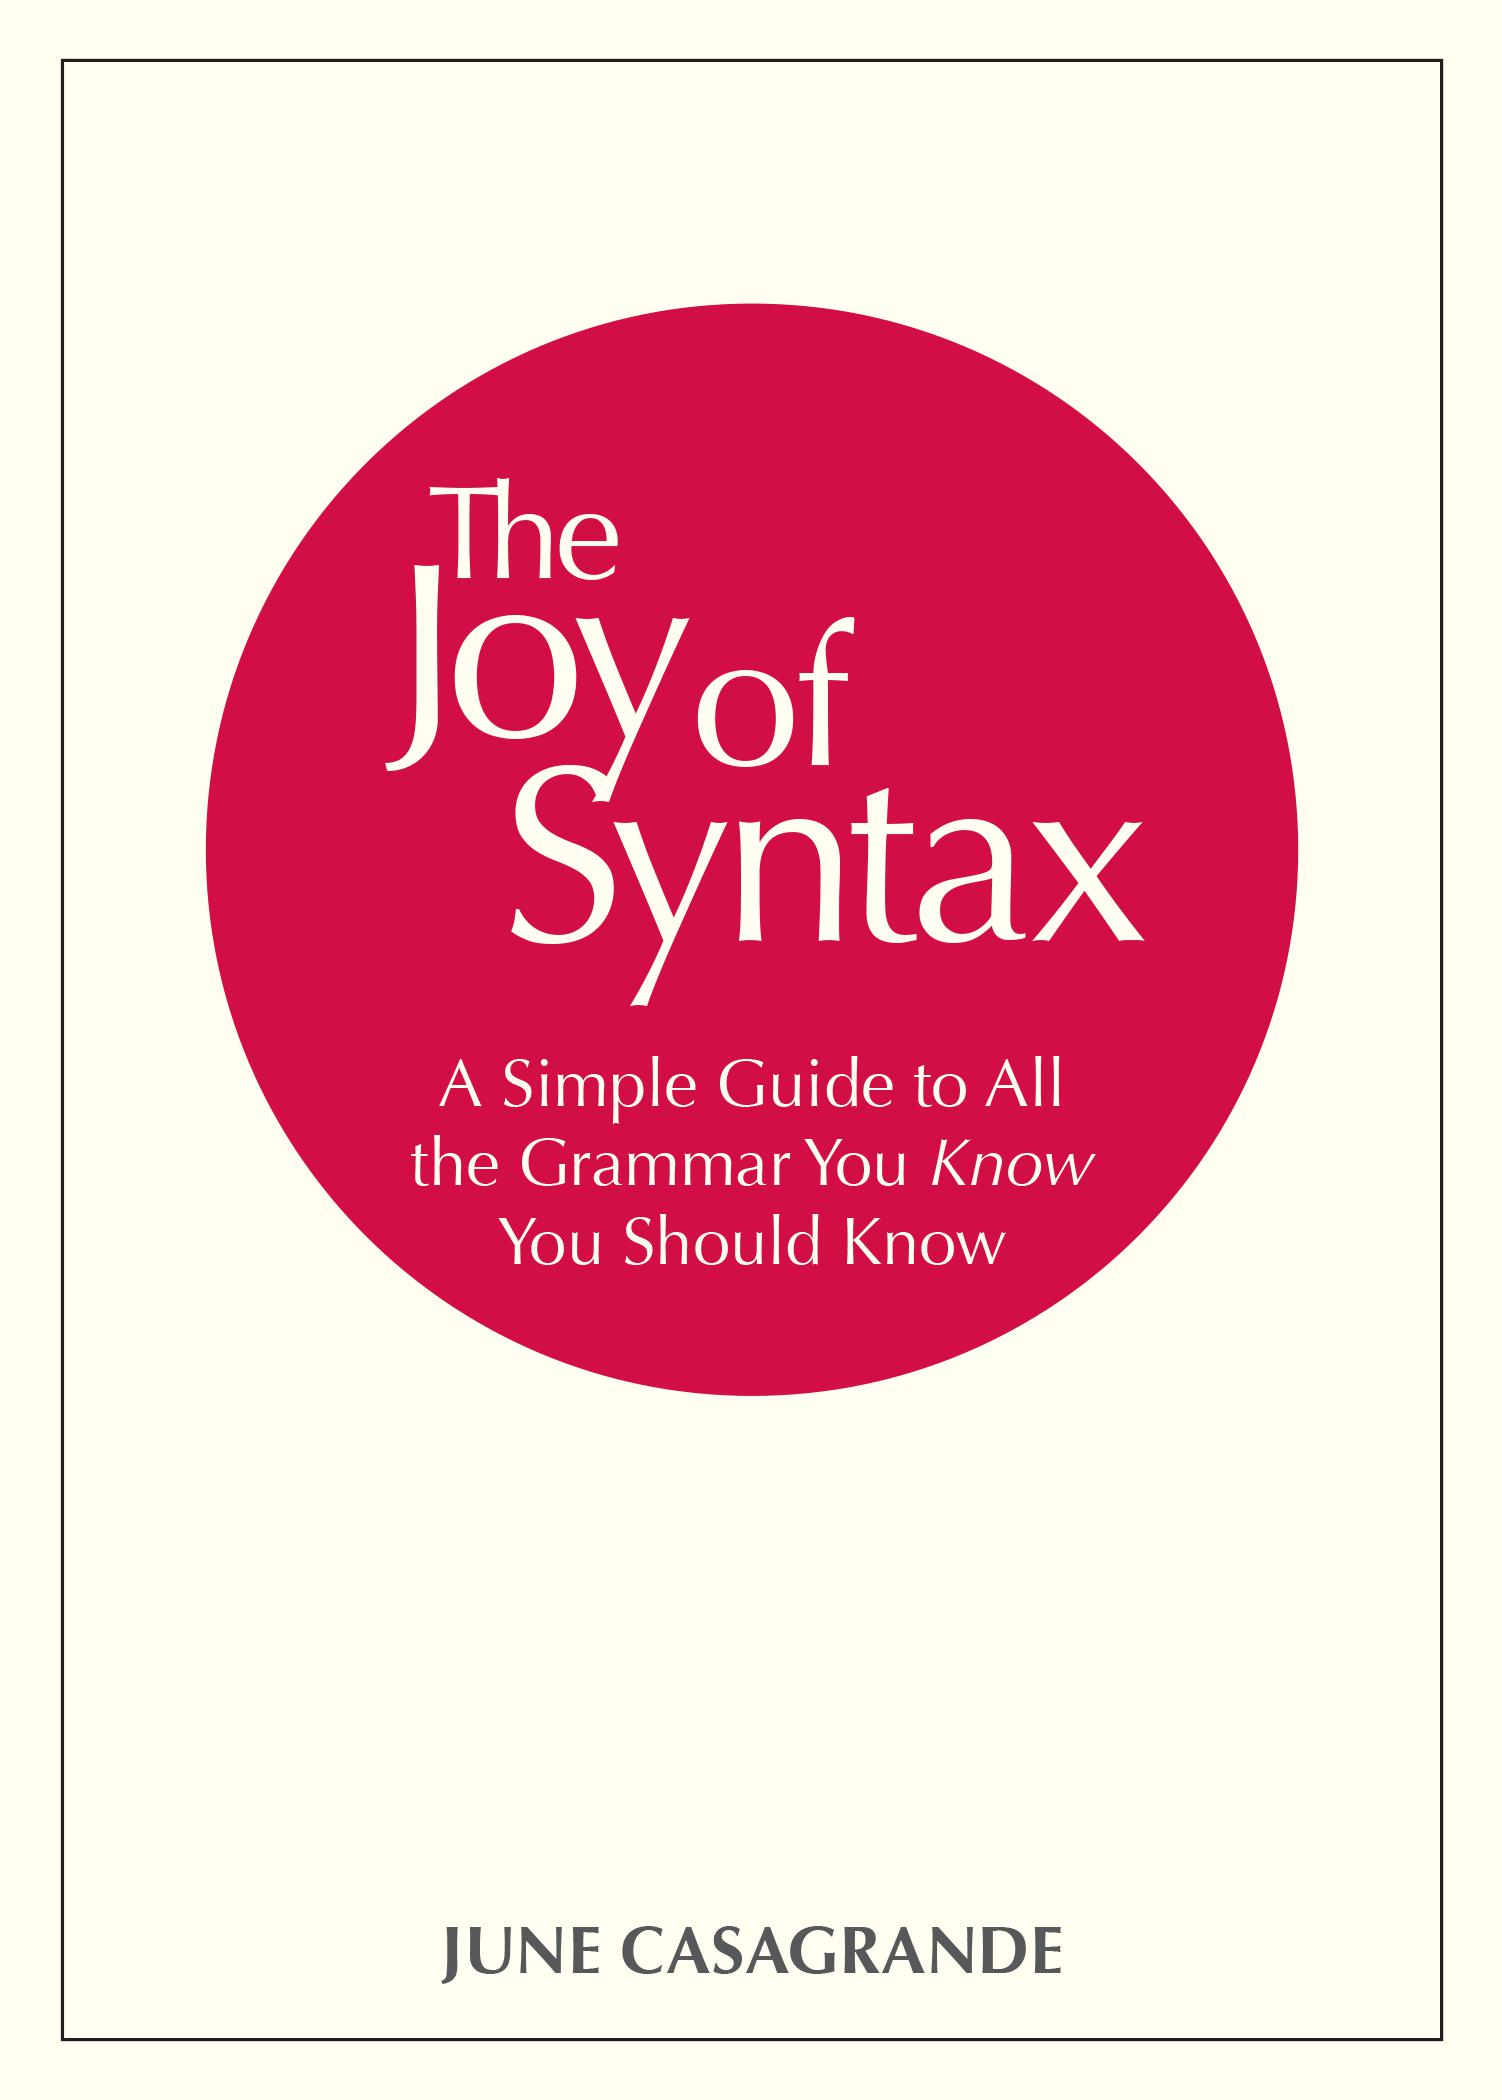 The Joy of Syntax: A Simple Guide to All the Grammar You Know You Should Know